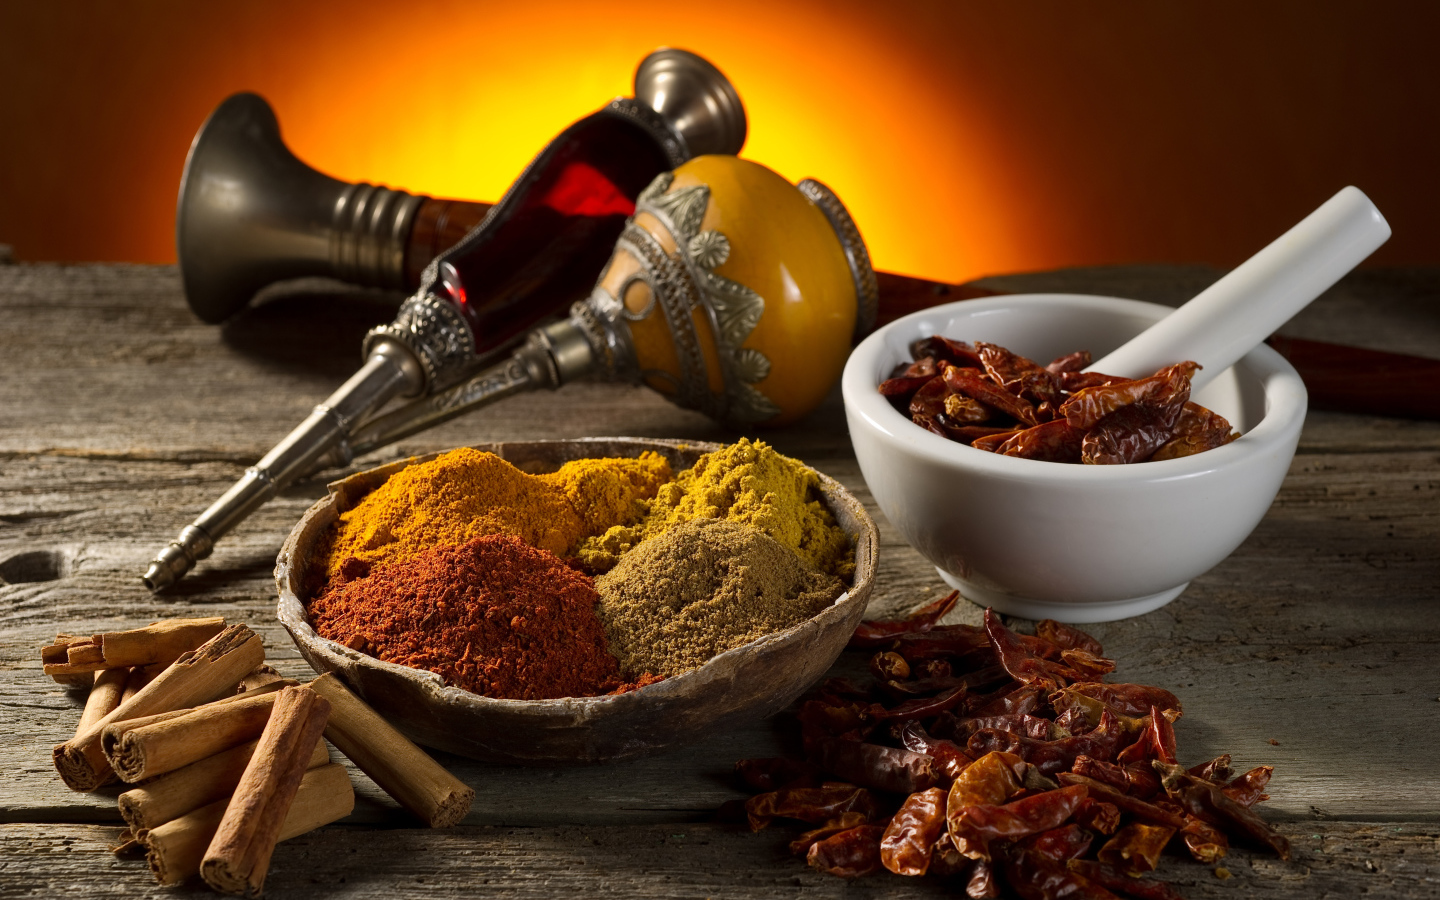 Spices and mortar for grinding